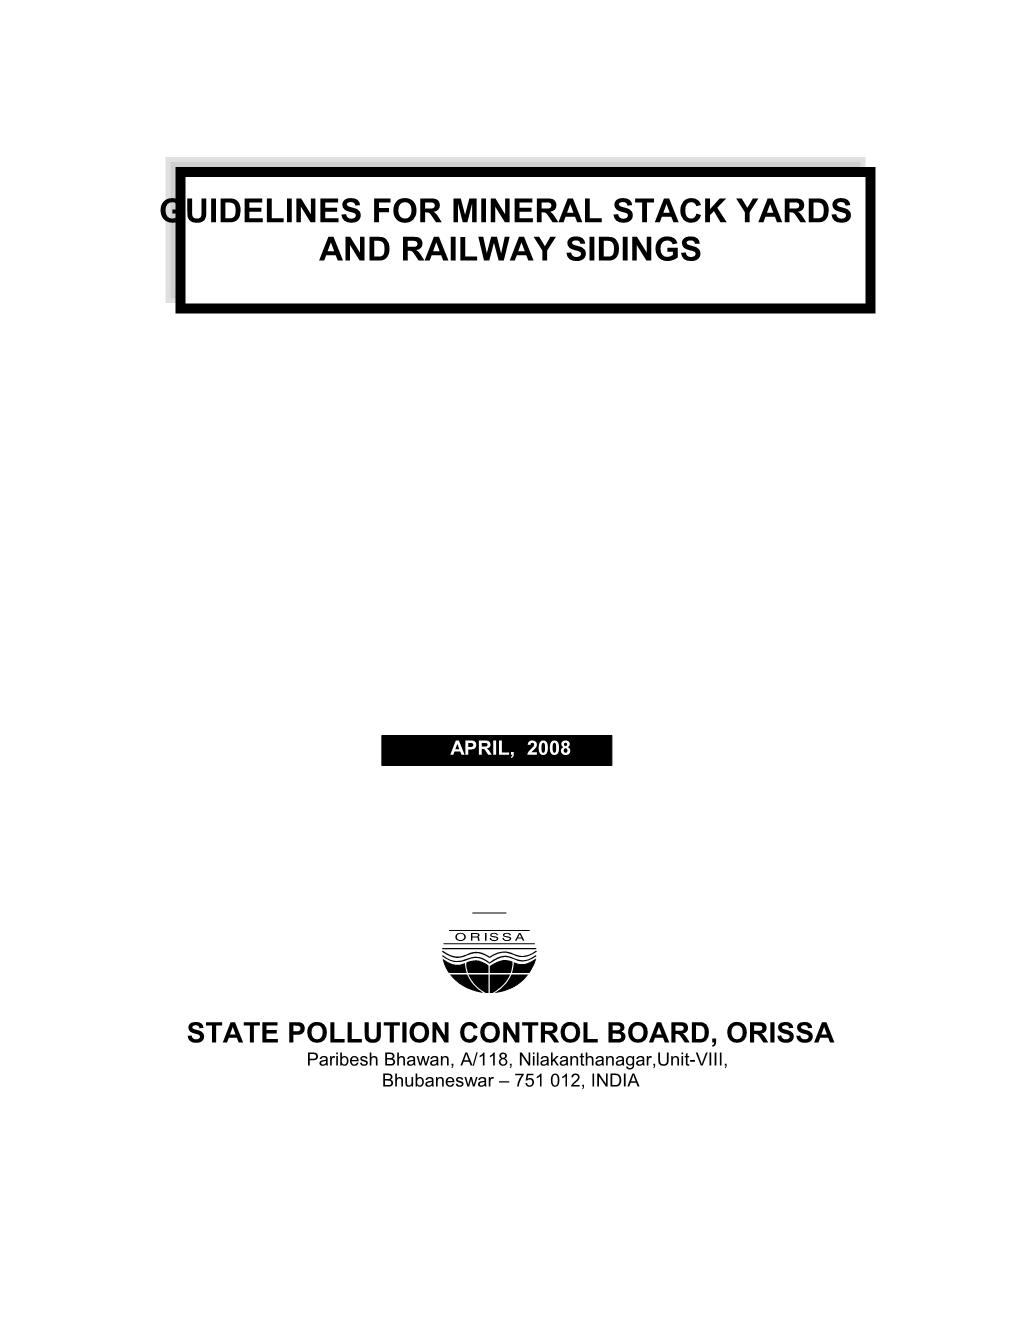 Guidelines for Mineral Stack Yards